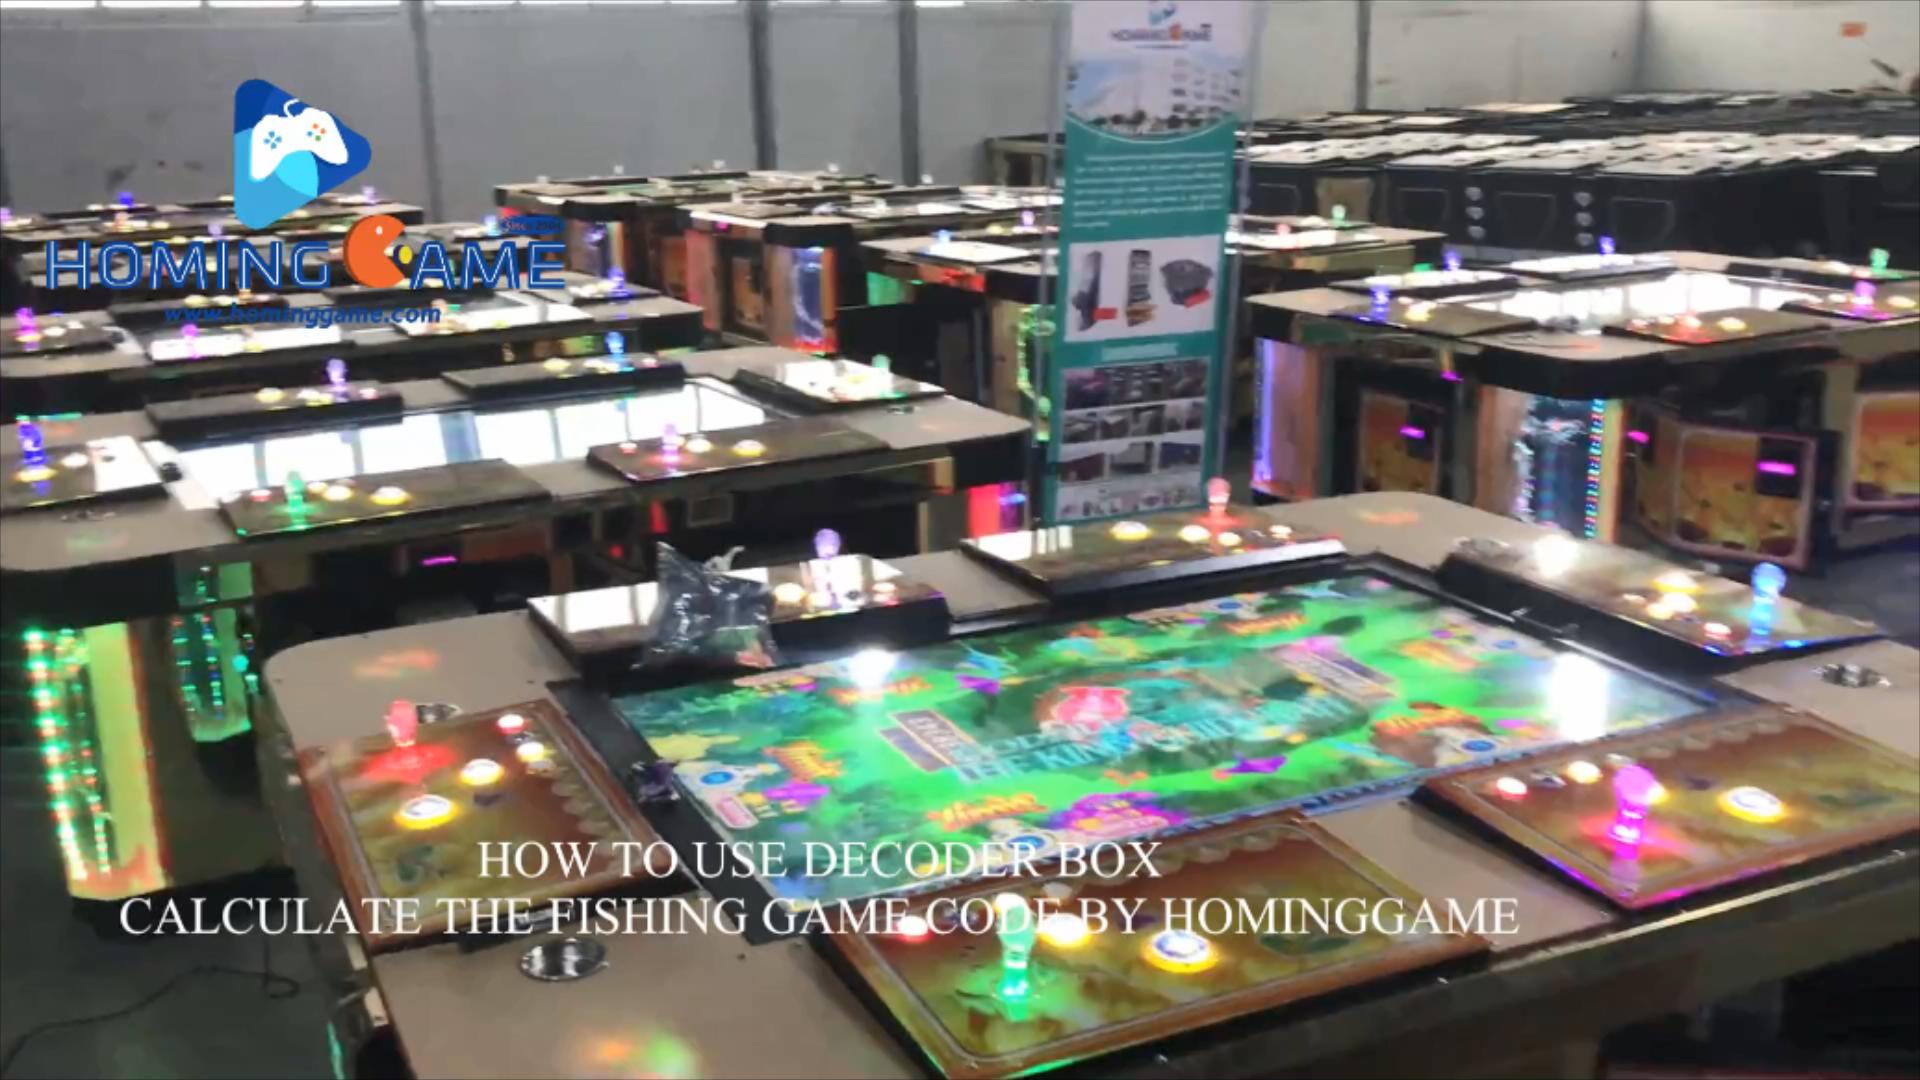 How to use the decoder box to calculate the Godzilla1,2,3,Aliens Vs Termination,Rampage,Dragon Legend,Dragon Slayer,zombie Awaken fishing game code by HomingGame(Order Call Whatsapp:+8618688409495),specialize in manufacturing and supplying fishing game,fishing table,fishing table game machine,fishing game machine,fishing arcade game machine,fish hunter fishing game machine,upright table fishing game machine,standup fishing game machine,ocean king 3 fishing game machine,capatian america fishing game machine,tiger stirke fishing game machine,godzilla fishing game machine,rampage fishing game machine,dragon legend fishing game machine,ocean king,igs fishing game machine,electrical fishing game machine,usa fishing game machine,ocean king 2 fishing gam emachine,fishing game machine supplier,fishing game machine manufacturer,gaming machine,gambling machine,game machine,arcade game machine,coin operated game machine,indoor game machine,electrical game machine,amusement park game equipment,amusement machine,gaming,casino gaming machine,usa fishing game machine supplier,USA fishing table game machine manufacturer,fishing game cheats,fishing game skills,how to paly the fishing game machine,fishing game decoding,fishing game decoder box,hominggame,www.gametube.hk,hominggame fishing game,entertainment game machine,family entertainment game machine,arcade game machine for sale